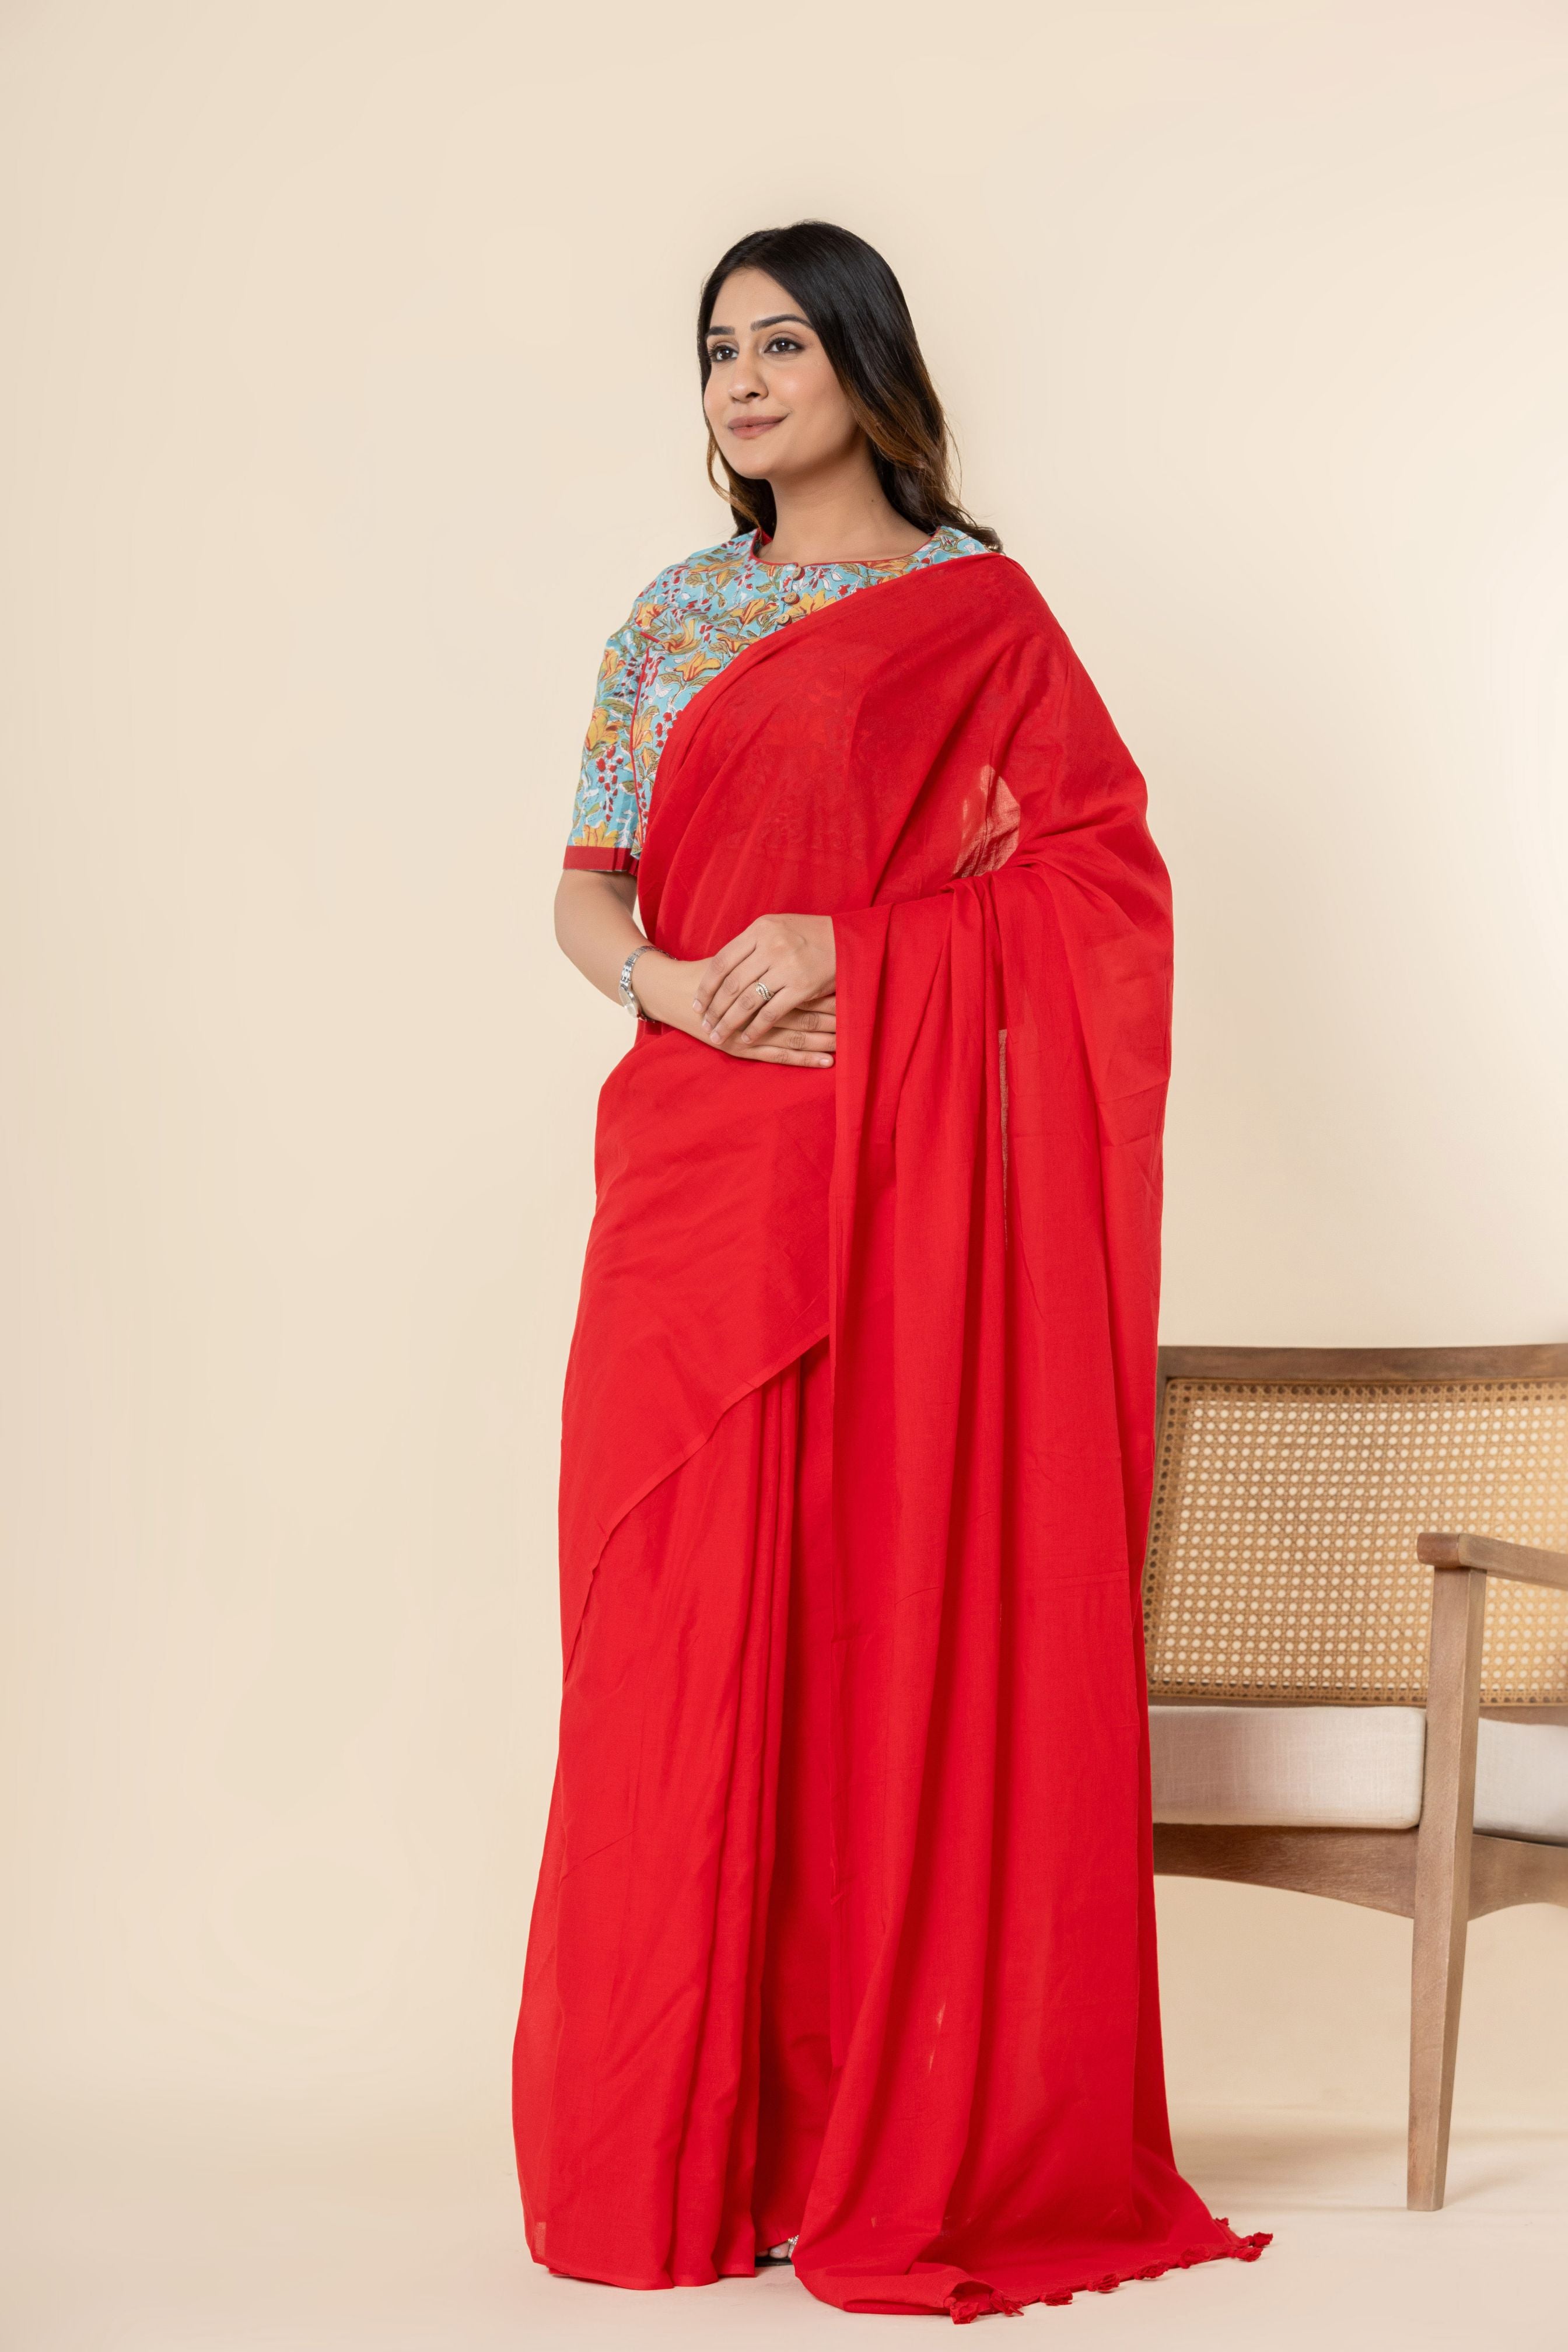 Tomatino Red Plain Dyed Mul Mul Cotton Saree with Tassels (without Blouse)